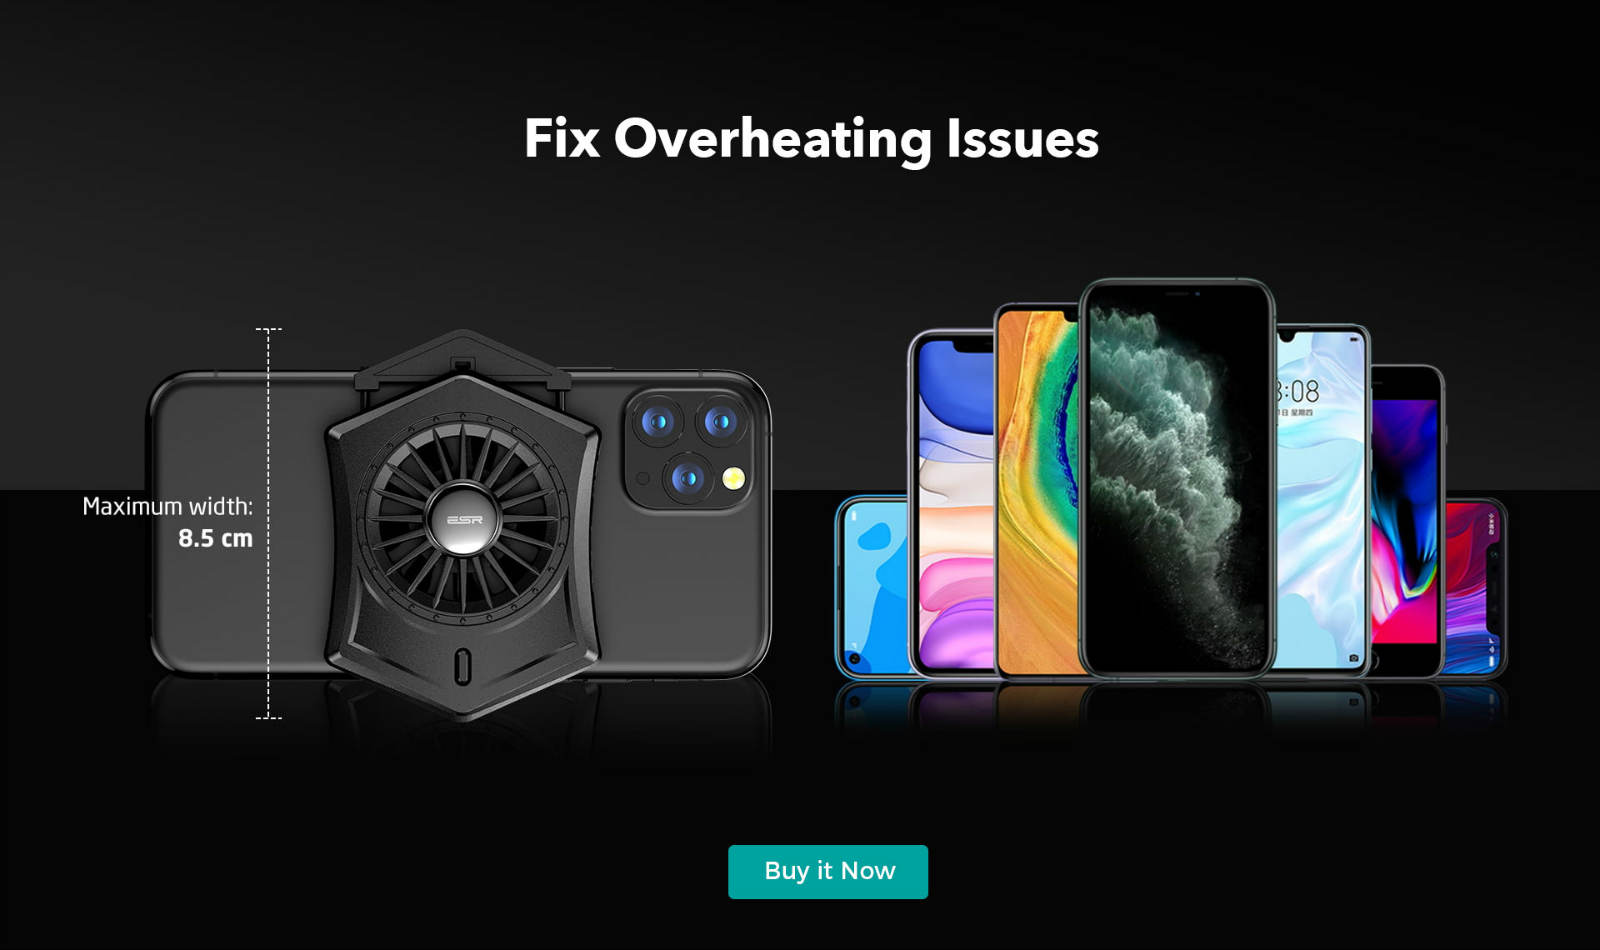 Fix Overheating Issues